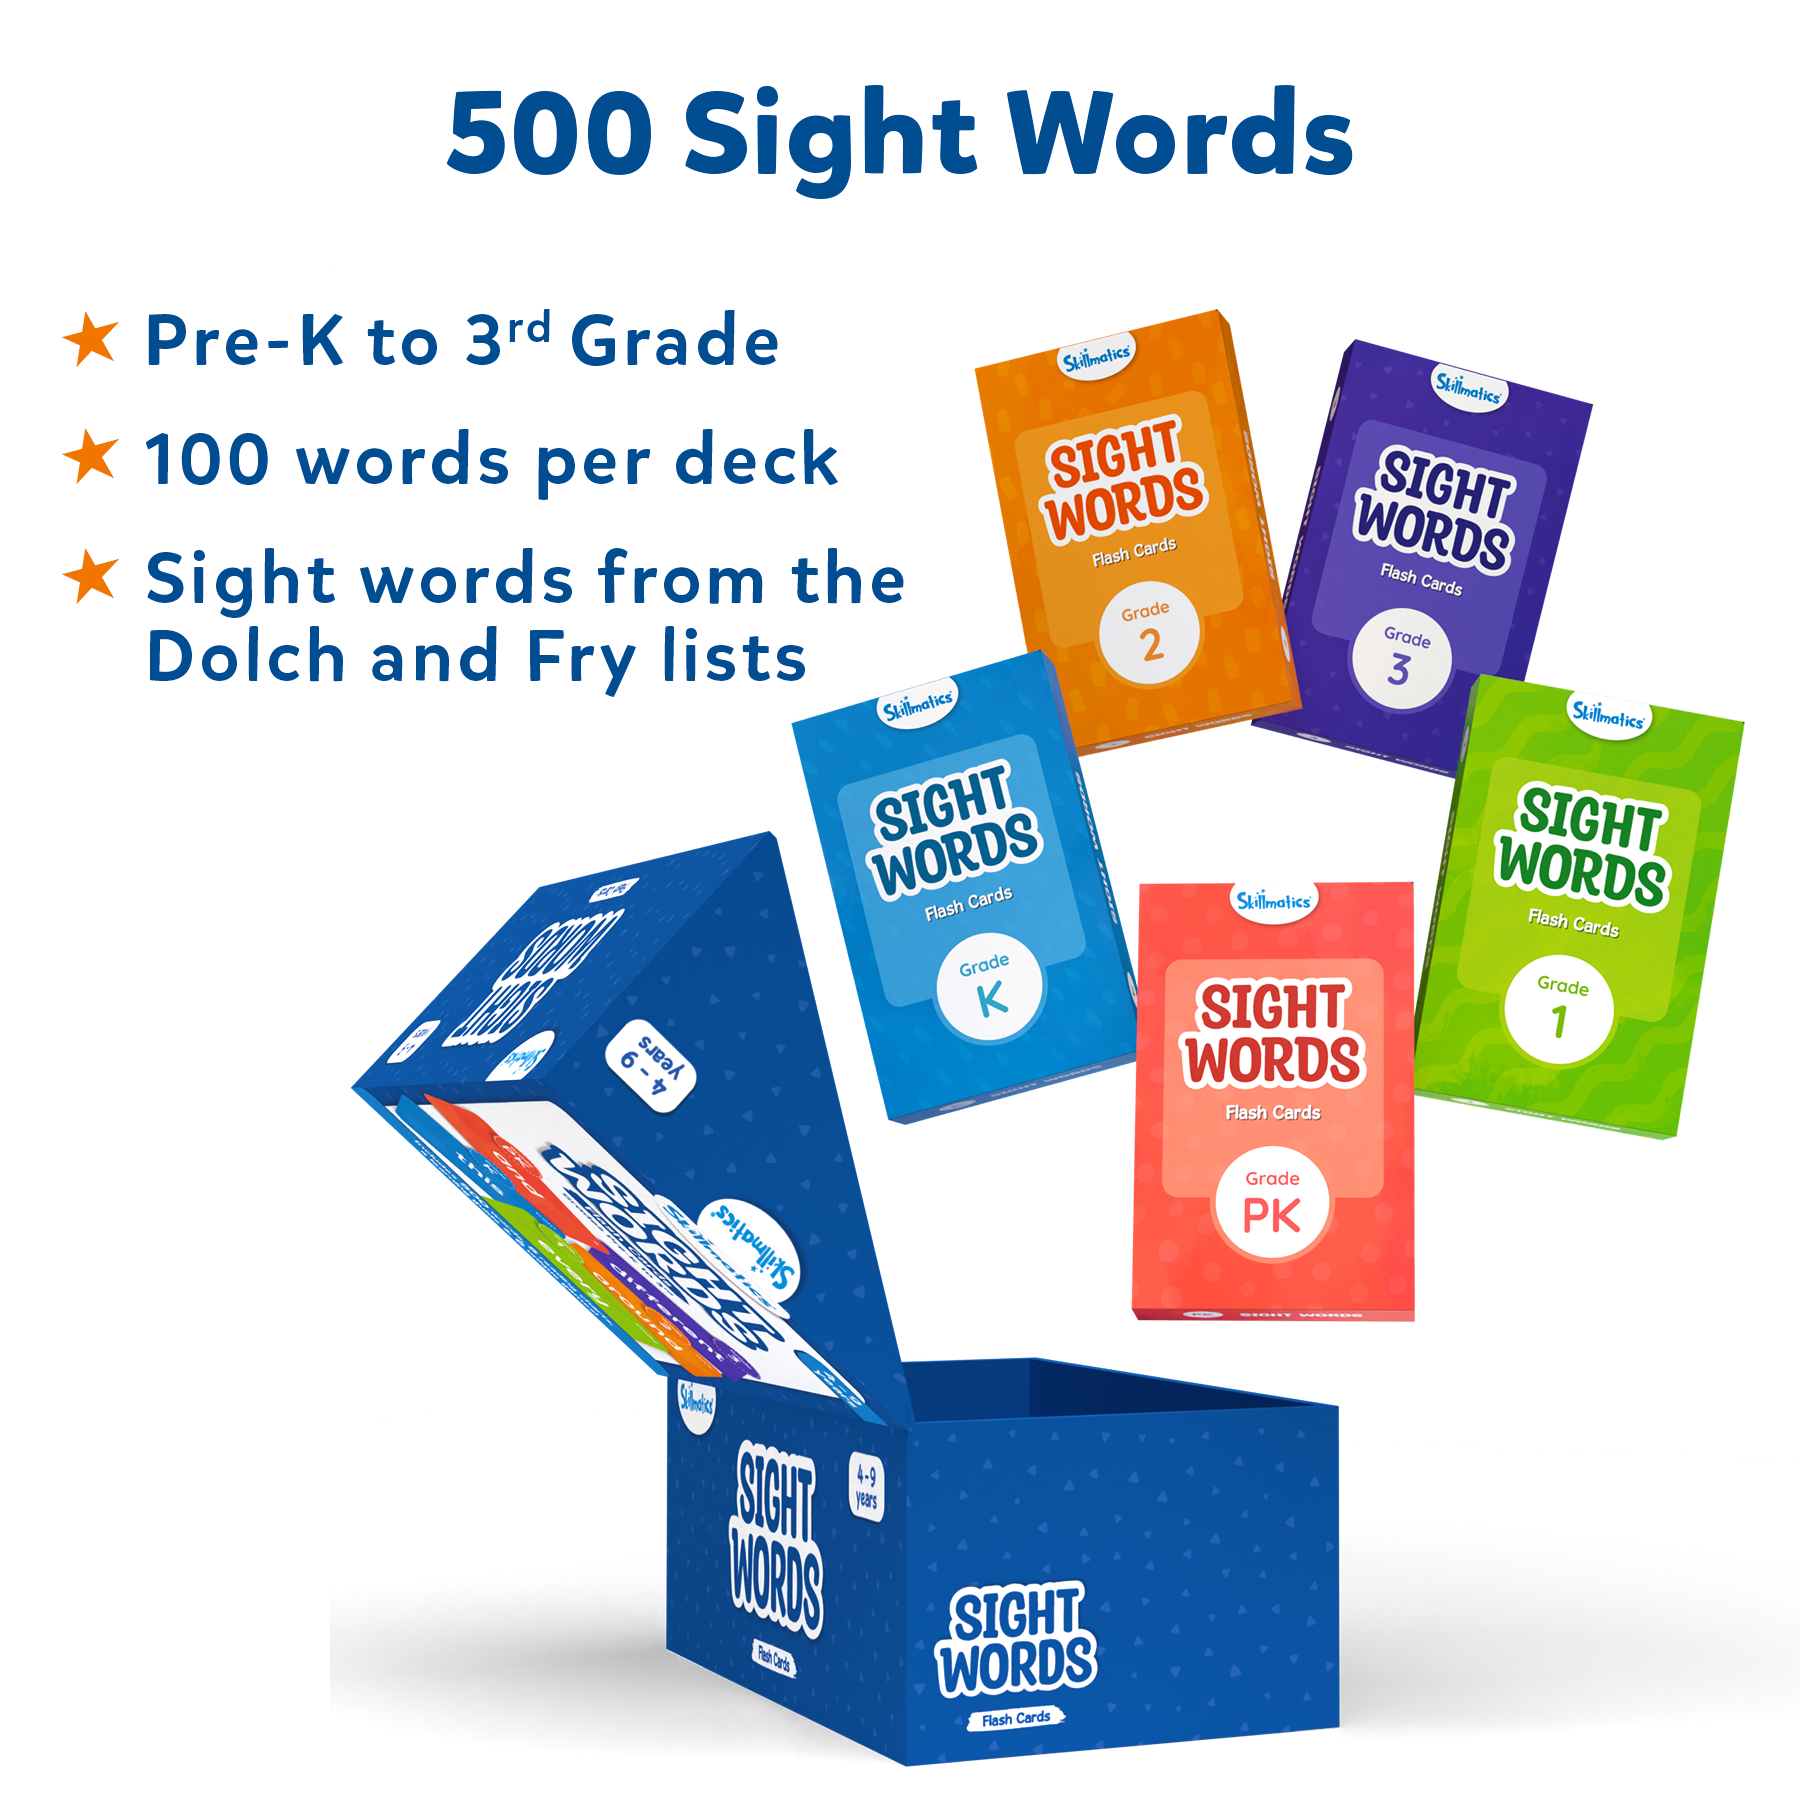 Skillmatics Flash Cards - 500 Sight Words, for Preschool (Pre-K), Kindergarten,1st, 2nd, 3rd Grade, Includes The Dolch & Fry Word List & 6 Unique Games